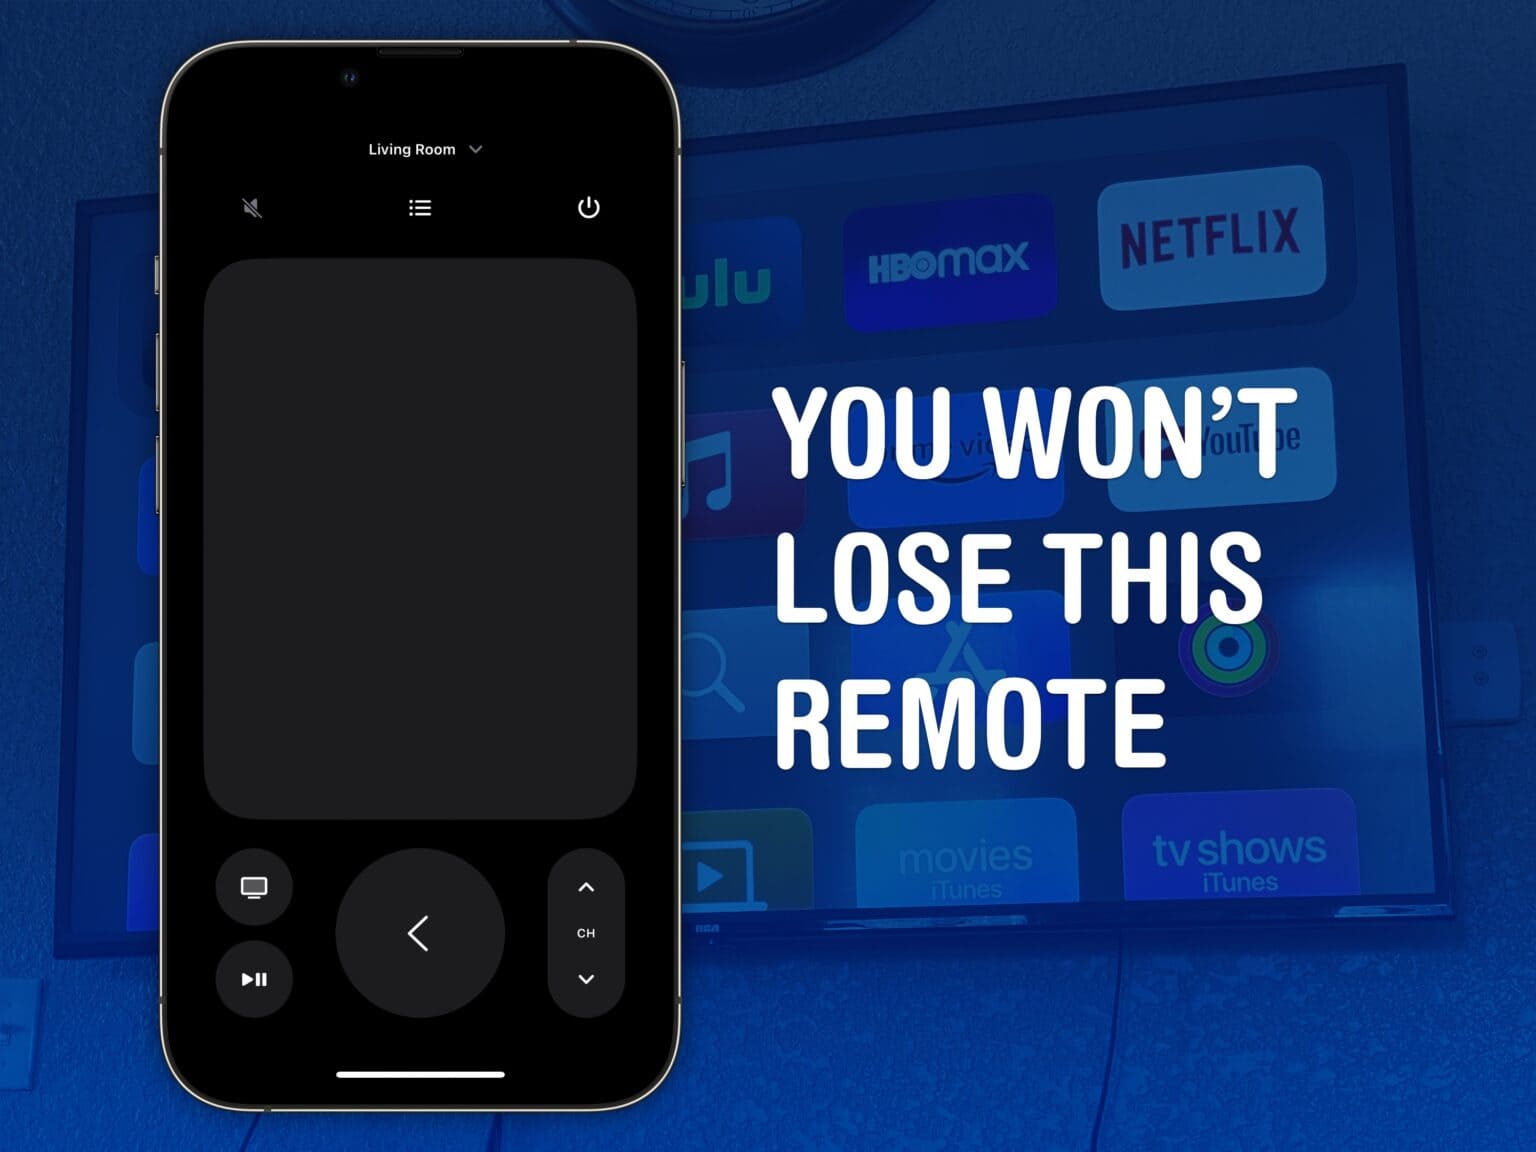 You won’t lose this remote